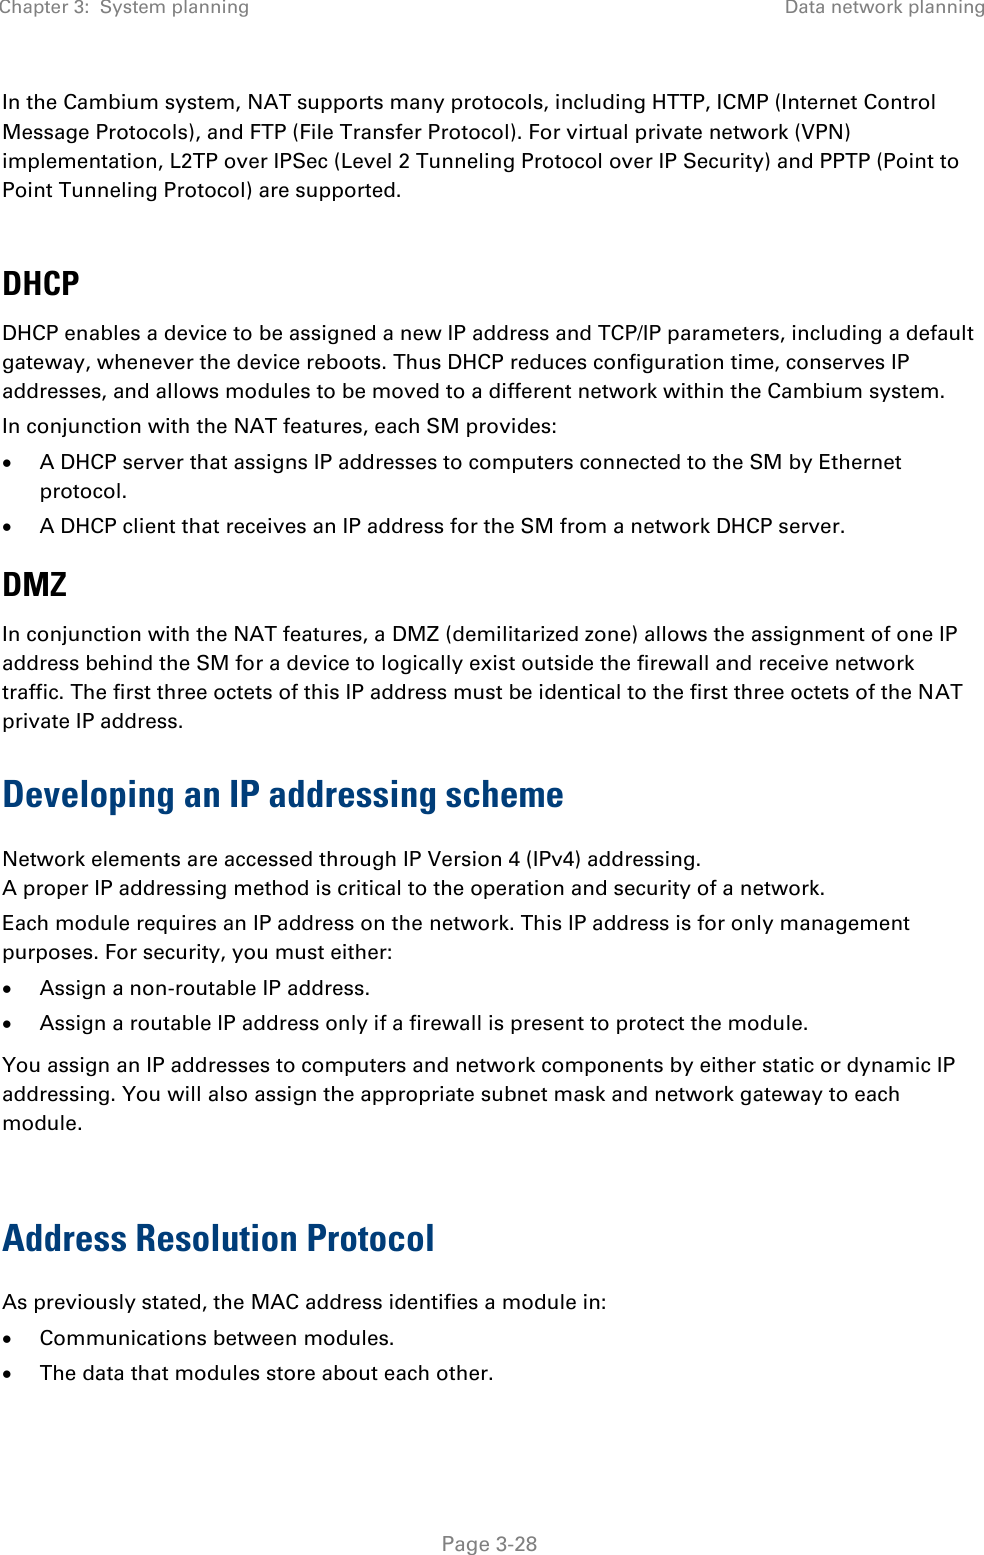 Chapter 3:  System planning Data network planning   Page 3-28 In the Cambium system, NAT supports many protocols, including HTTP, ICMP (Internet Control Message Protocols), and FTP (File Transfer Protocol). For virtual private network (VPN) implementation, L2TP over IPSec (Level 2 Tunneling Protocol over IP Security) and PPTP (Point to Point Tunneling Protocol) are supported.   DHCP DHCP enables a device to be assigned a new IP address and TCP/IP parameters, including a default gateway, whenever the device reboots. Thus DHCP reduces configuration time, conserves IP addresses, and allows modules to be moved to a different network within the Cambium system. In conjunction with the NAT features, each SM provides:  A DHCP server that assigns IP addresses to computers connected to the SM by Ethernet protocol.  A DHCP client that receives an IP address for the SM from a network DHCP server. DMZ In conjunction with the NAT features, a DMZ (demilitarized zone) allows the assignment of one IP address behind the SM for a device to logically exist outside the firewall and receive network traffic. The first three octets of this IP address must be identical to the first three octets of the NAT private IP address. Developing an IP addressing scheme Network elements are accessed through IP Version 4 (IPv4) addressing.  A proper IP addressing method is critical to the operation and security of a network. Each module requires an IP address on the network. This IP address is for only management purposes. For security, you must either:  Assign a non-routable IP address.  Assign a routable IP address only if a firewall is present to protect the module.  You assign an IP addresses to computers and network components by either static or dynamic IP addressing. You will also assign the appropriate subnet mask and network gateway to each module.   Address Resolution Protocol As previously stated, the MAC address identifies a module in:  Communications between modules.  The data that modules store about each other. 